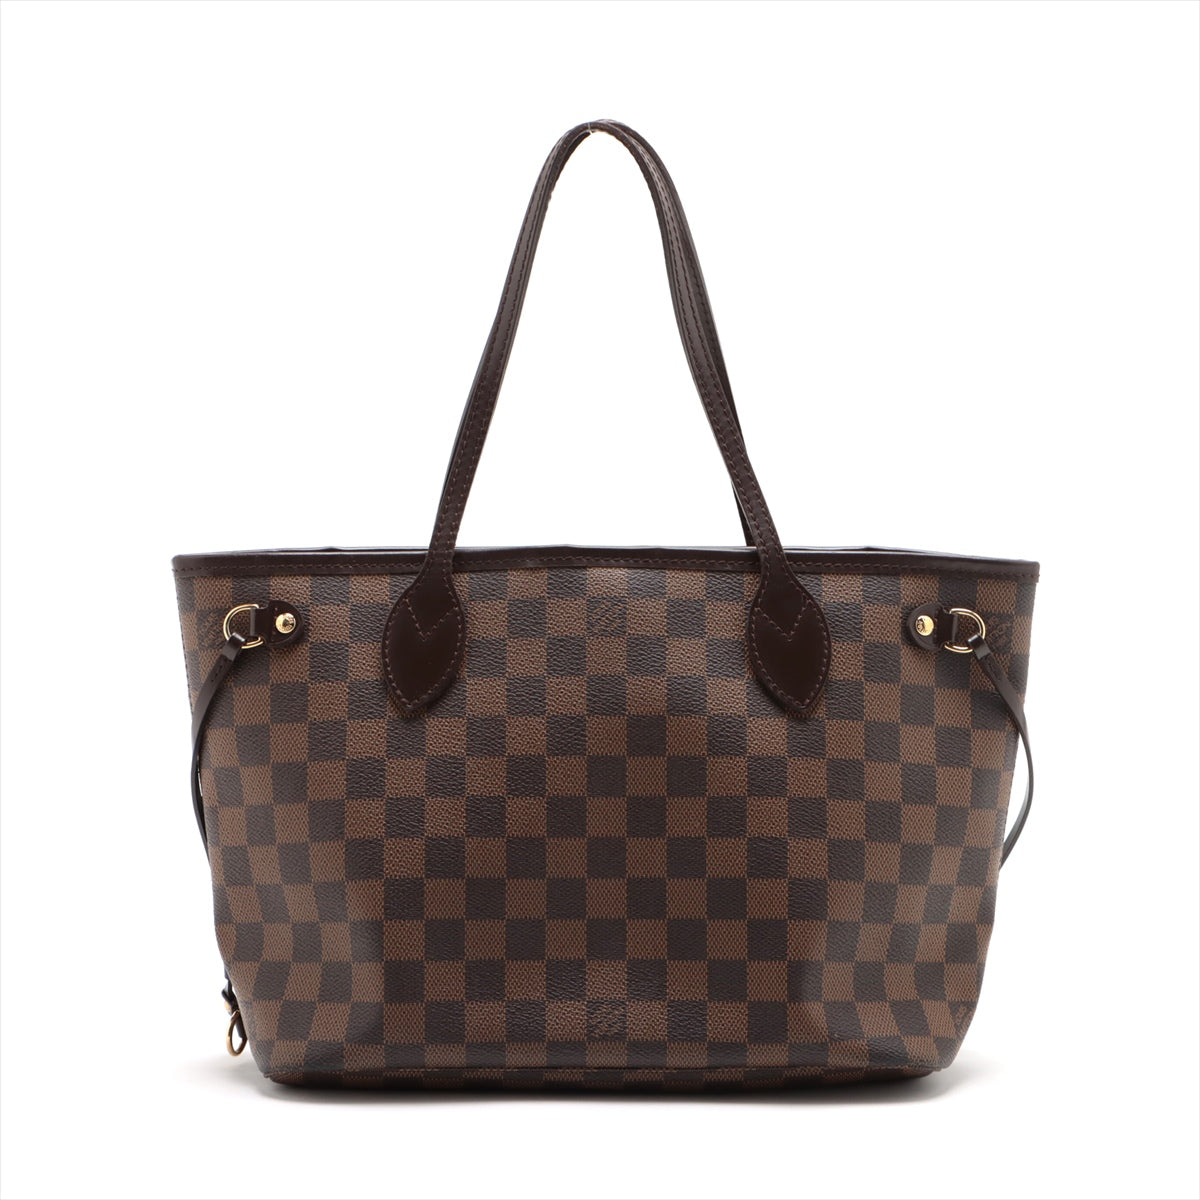 LOUIS VUITTON Neverfull PM in Damier N51109